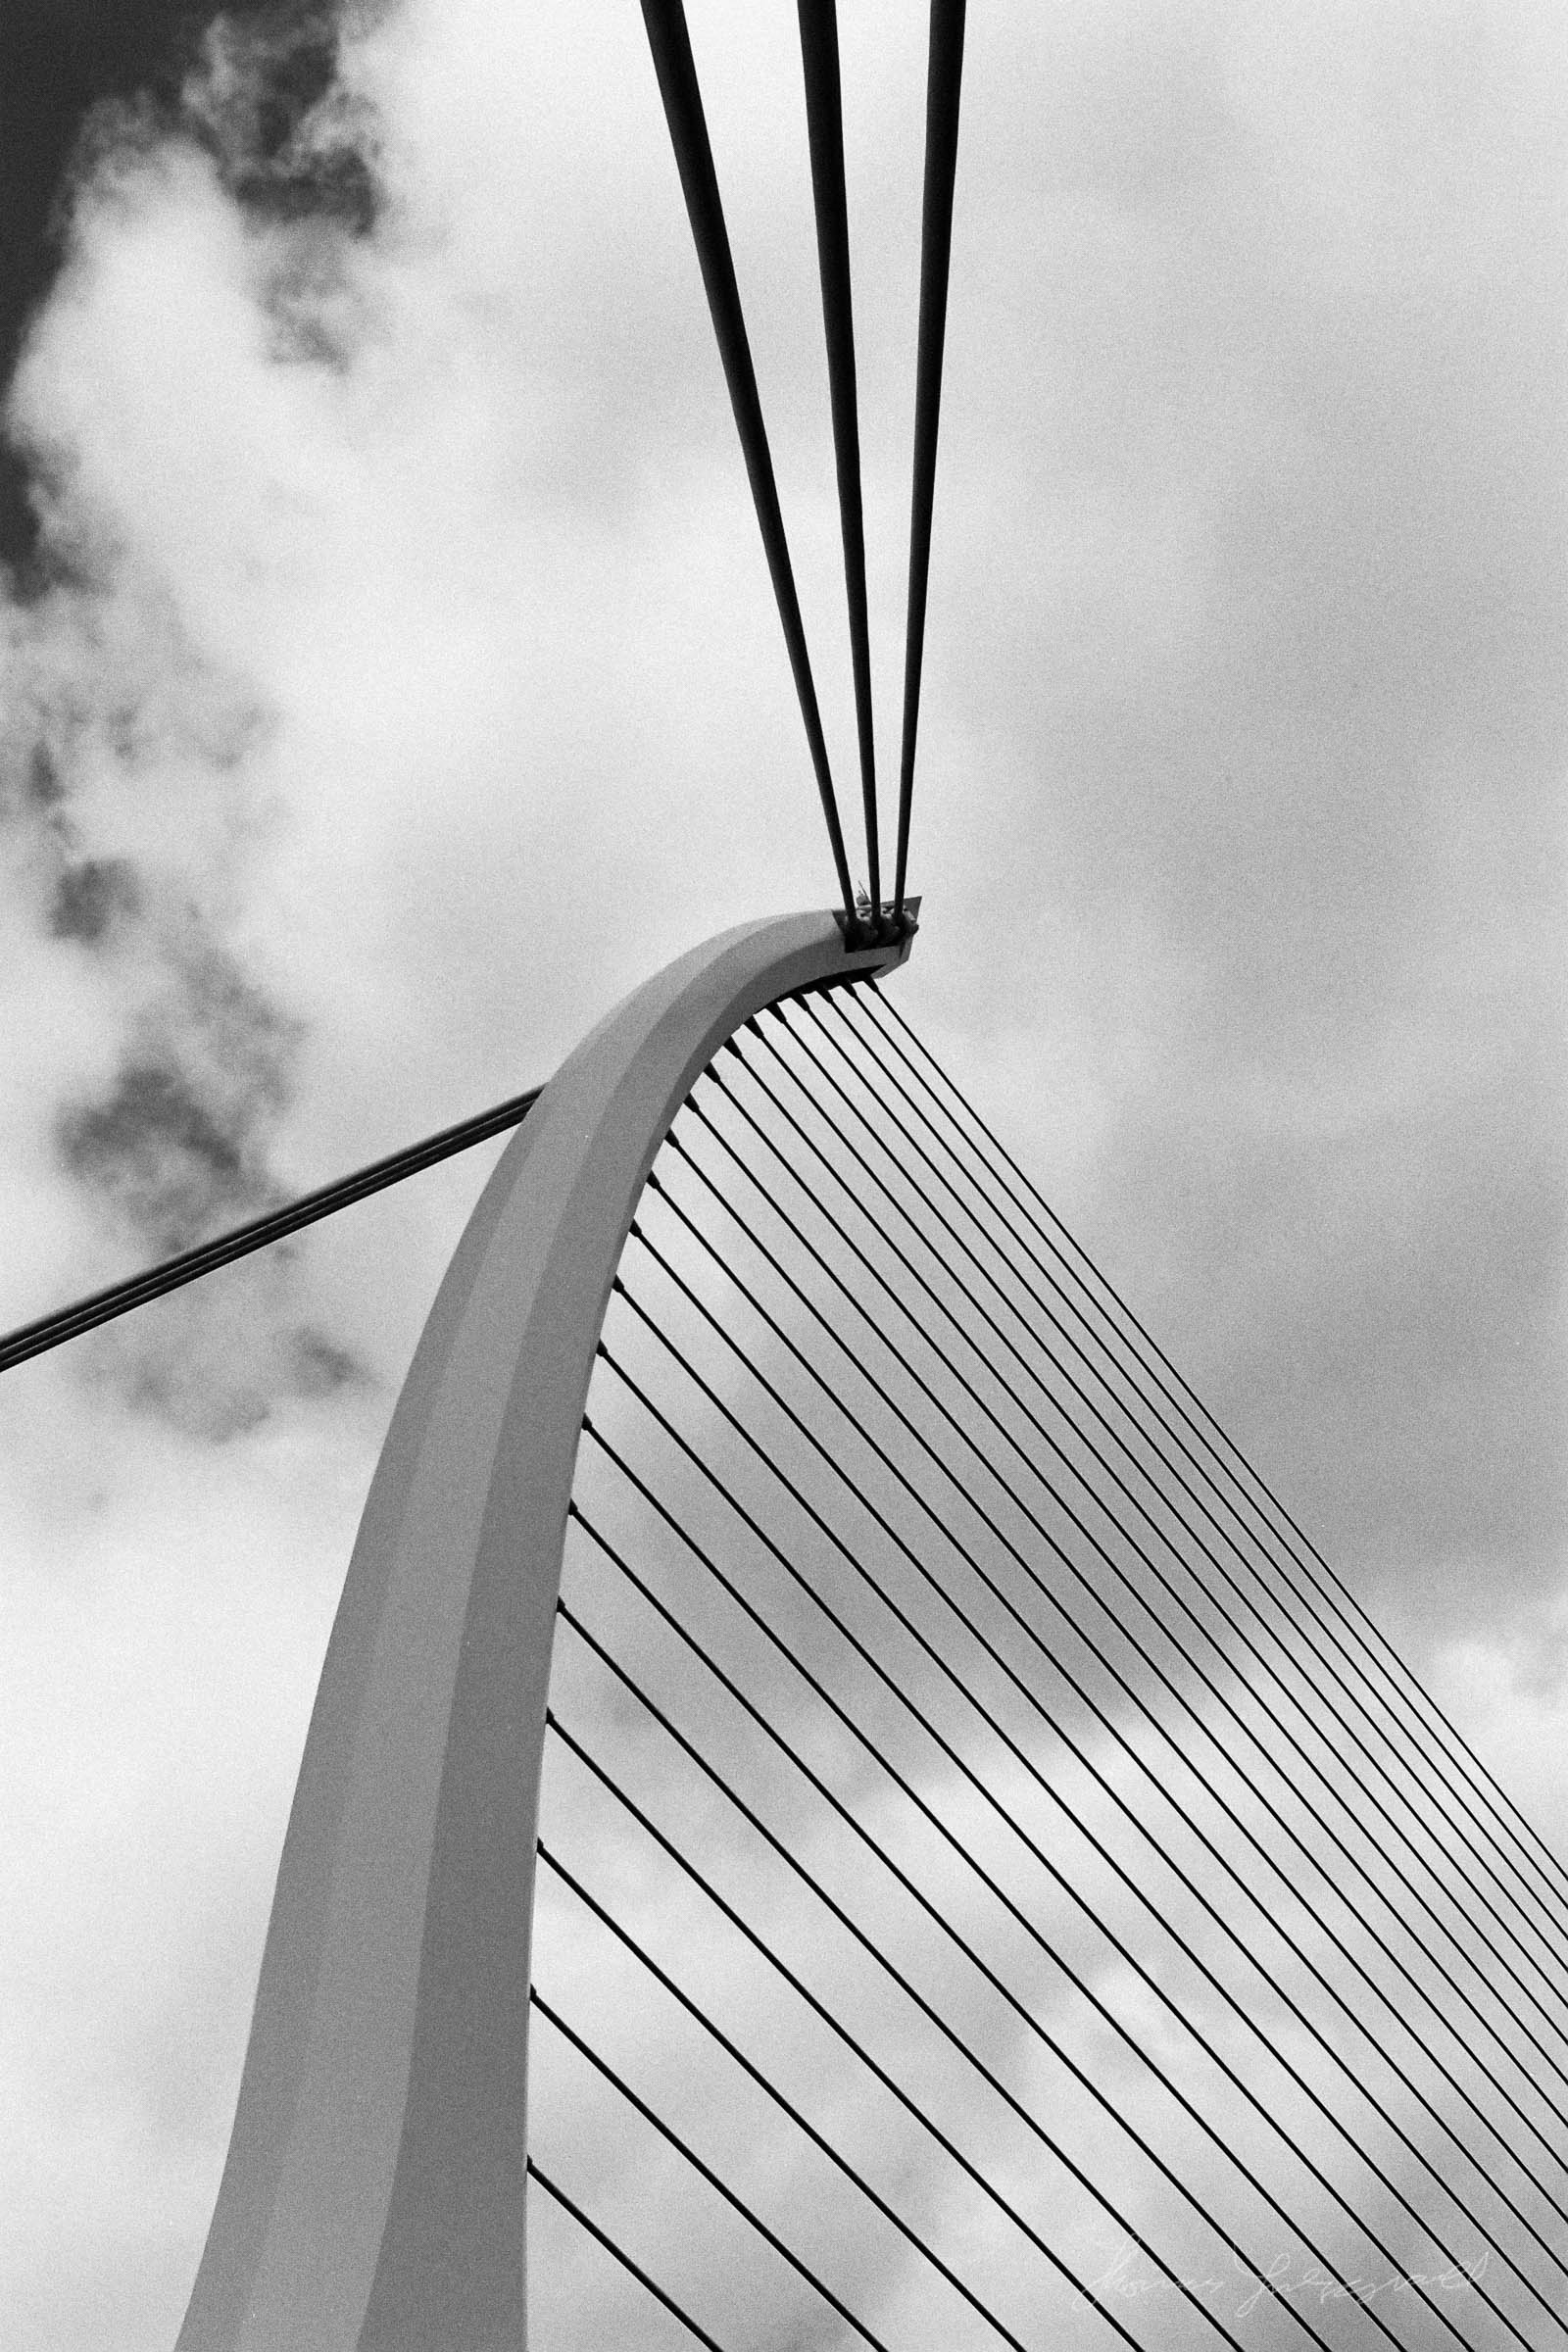 The Suspension cables of the Beckett Bridge